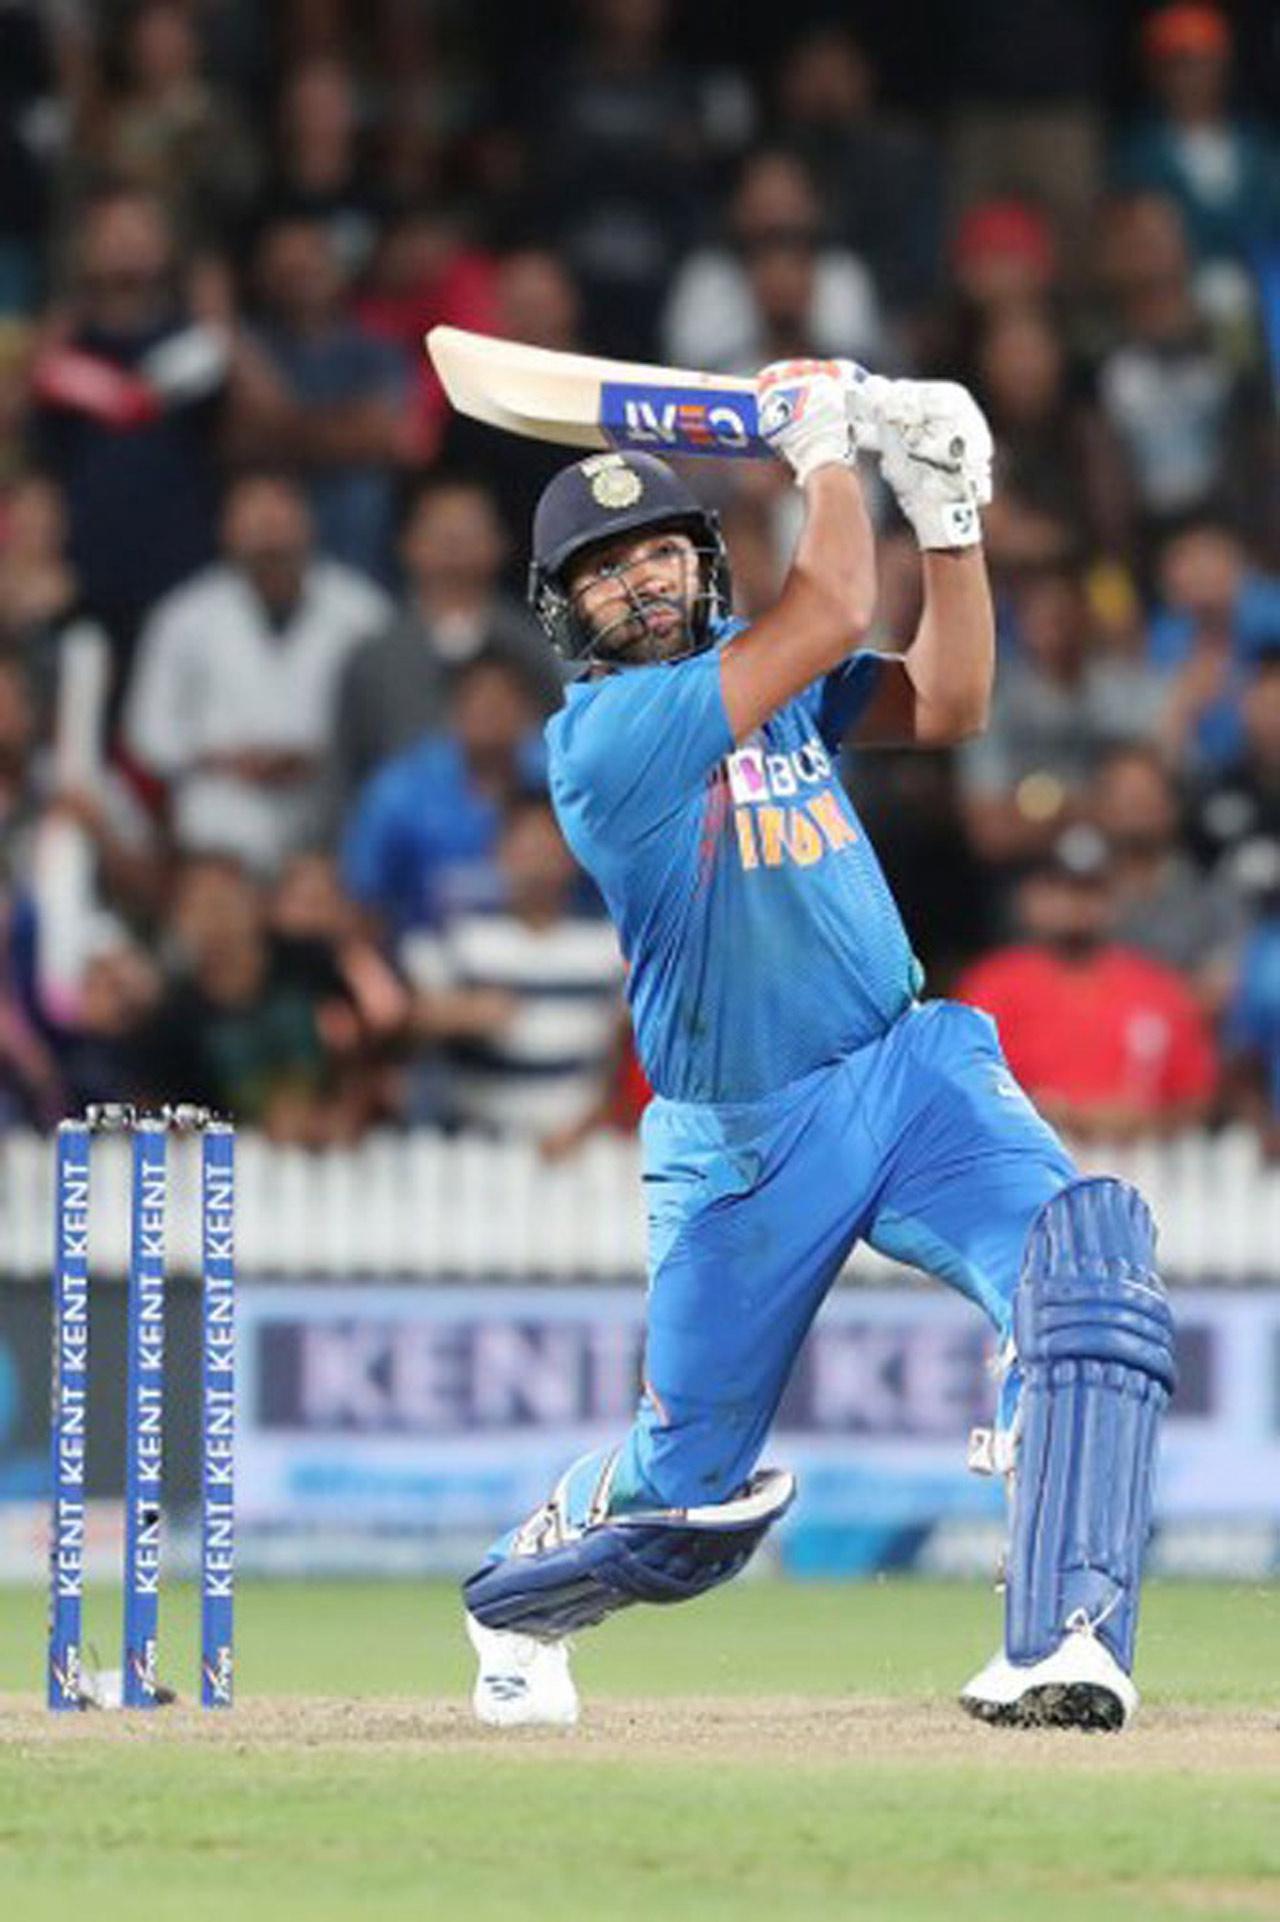 During the third ODI match between India and Australia on January 19, 2020, India's star opening batsman Rohit Sharma scored his 9,000th run in ODIs and is the seventh-highest in terms of Indian cricketers to do so.